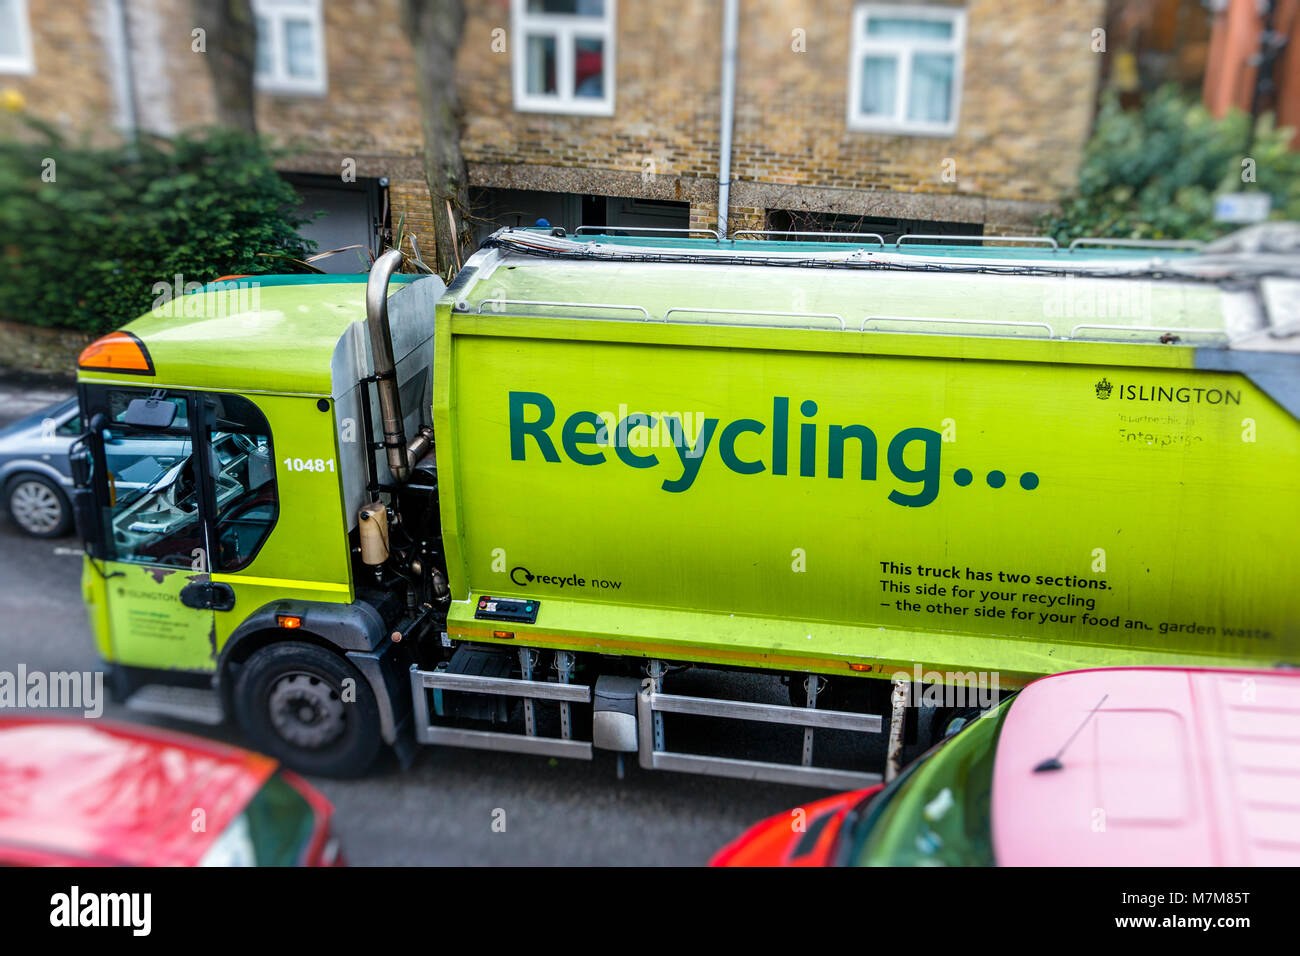 Recycling lorry making its weekly collection in a residential street in Islington, London, UK Stock Photo